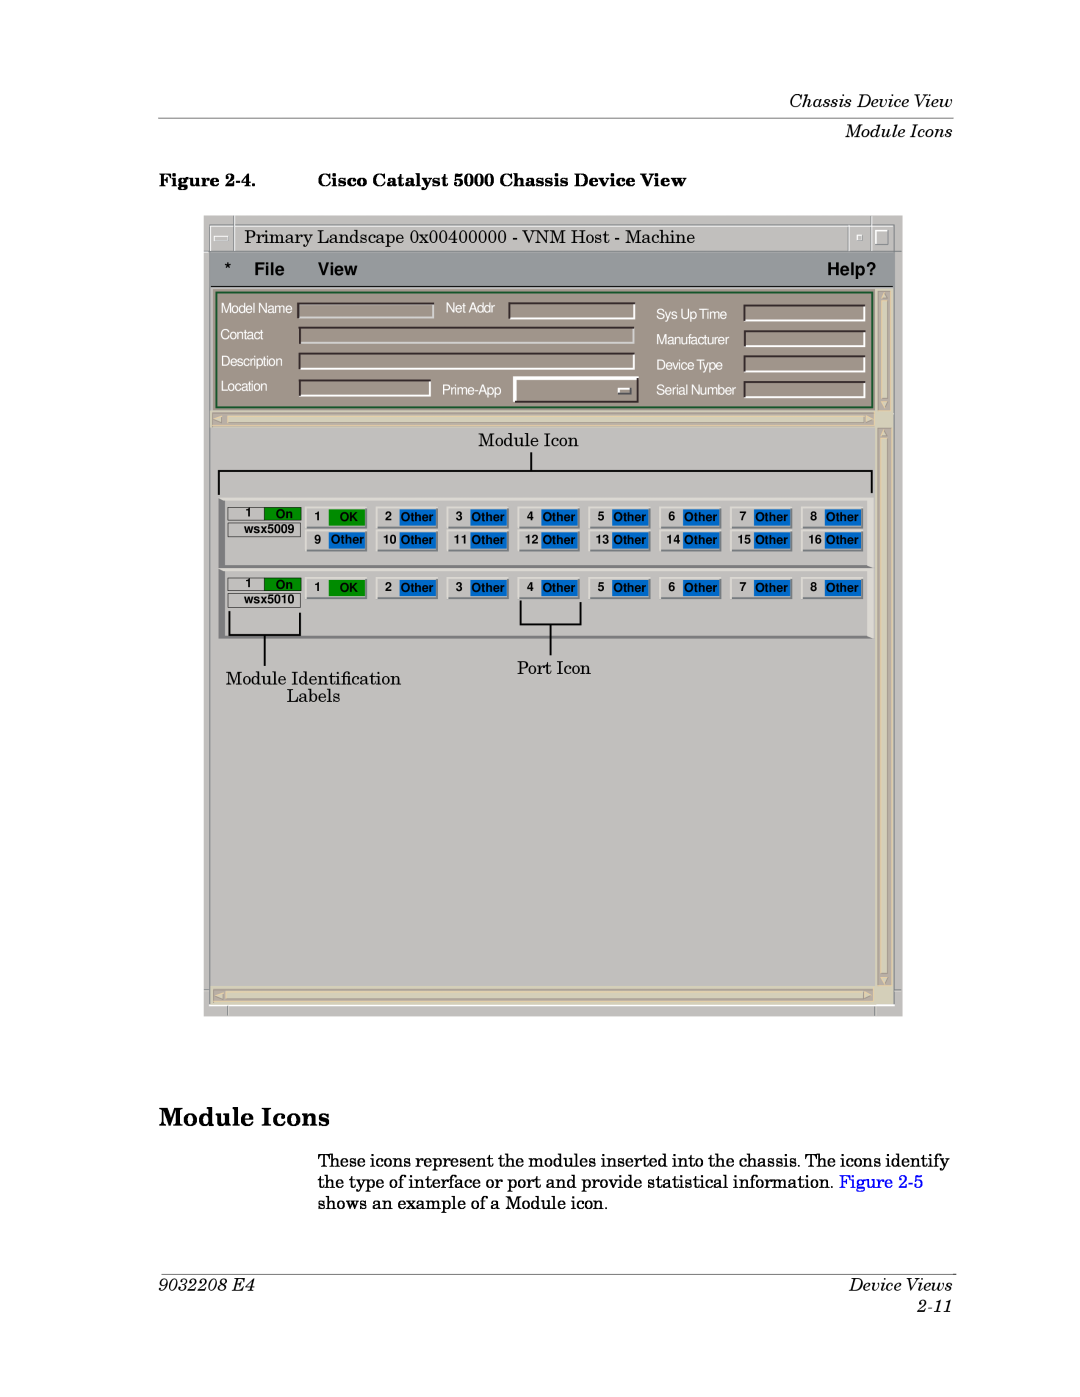 Cabletron Systems 5000, 5500 Chassis Device View Module Icons, 4. Cisco Catalyst 5000 Chassis Device View, File, Help? 